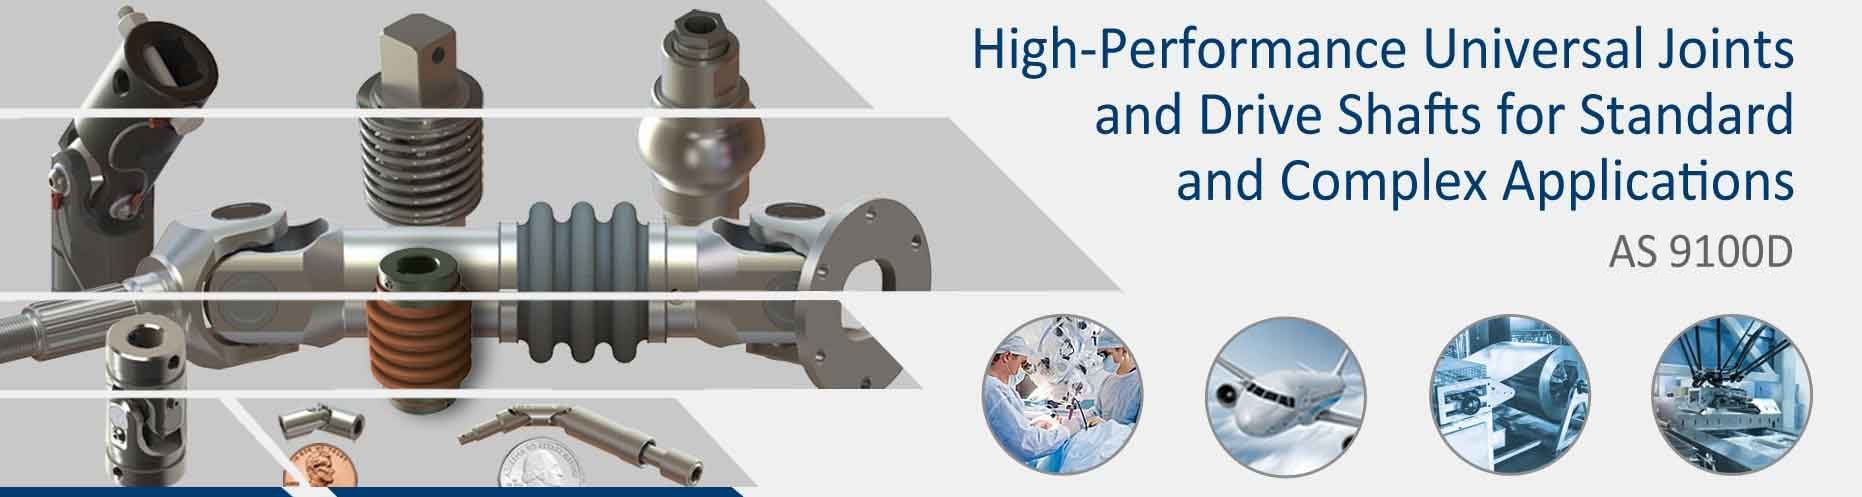 Belden High Performance Universal Joints and Drive Shafts